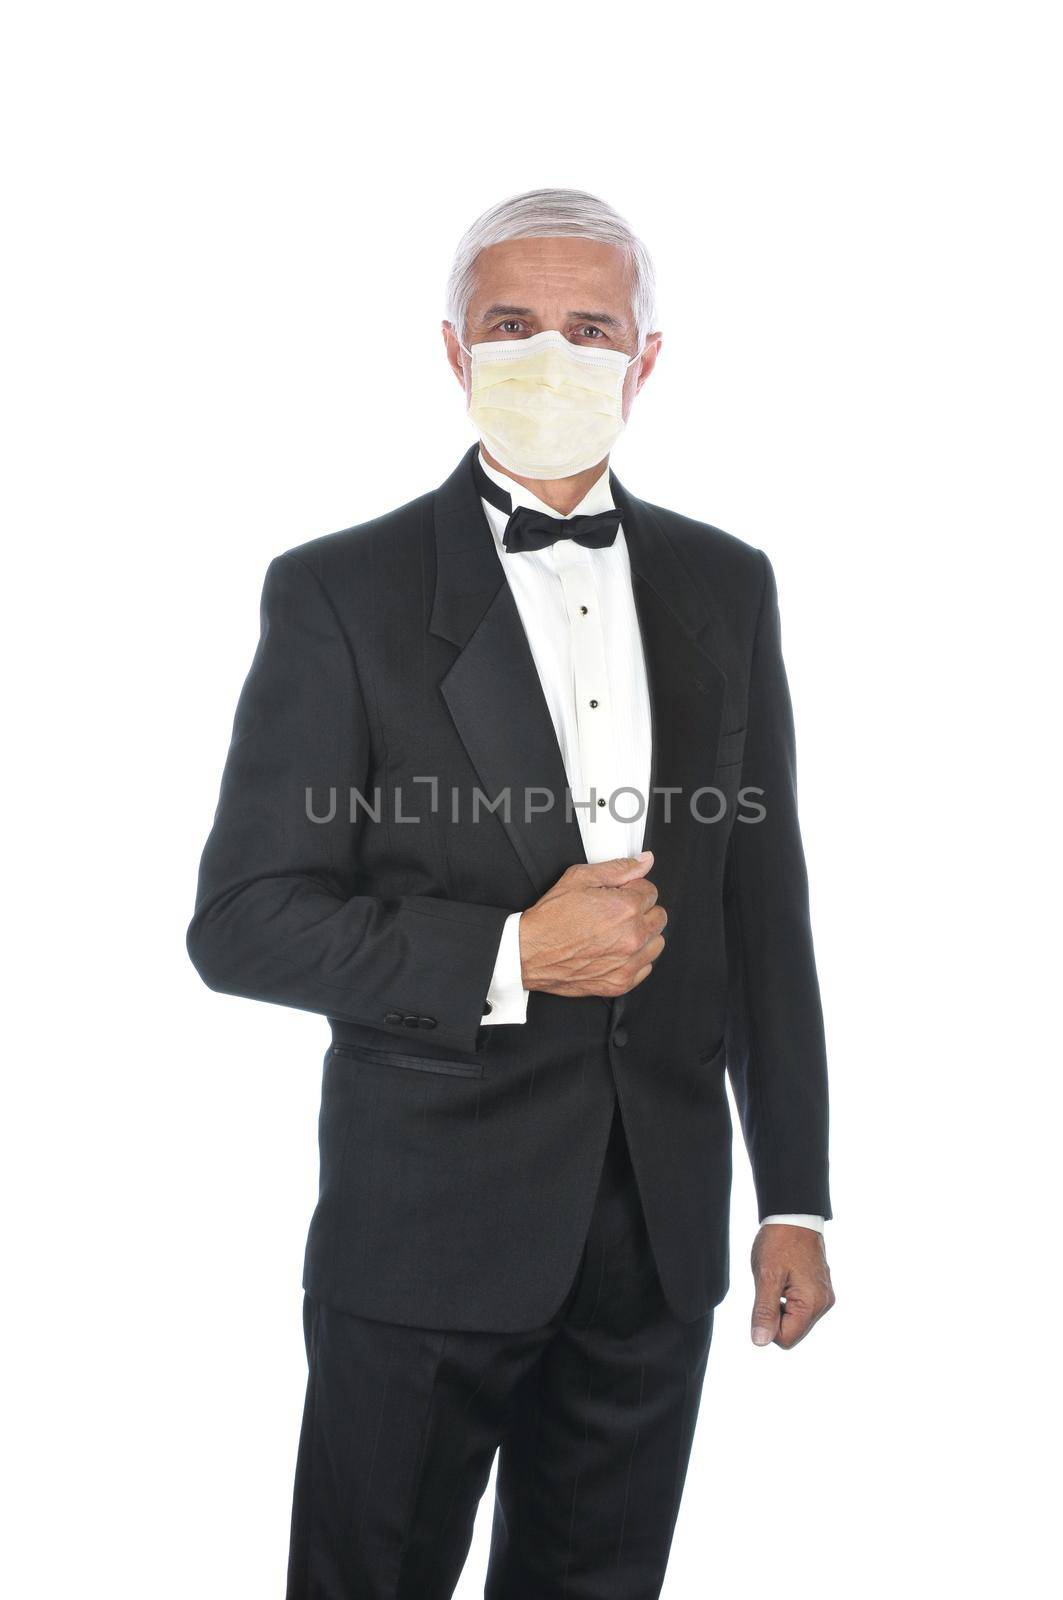 Mature Adult Male Wearing Tuxedo and Covid-19 protective mask, holding lapel and one hand at side, isolated on white. by sCukrov